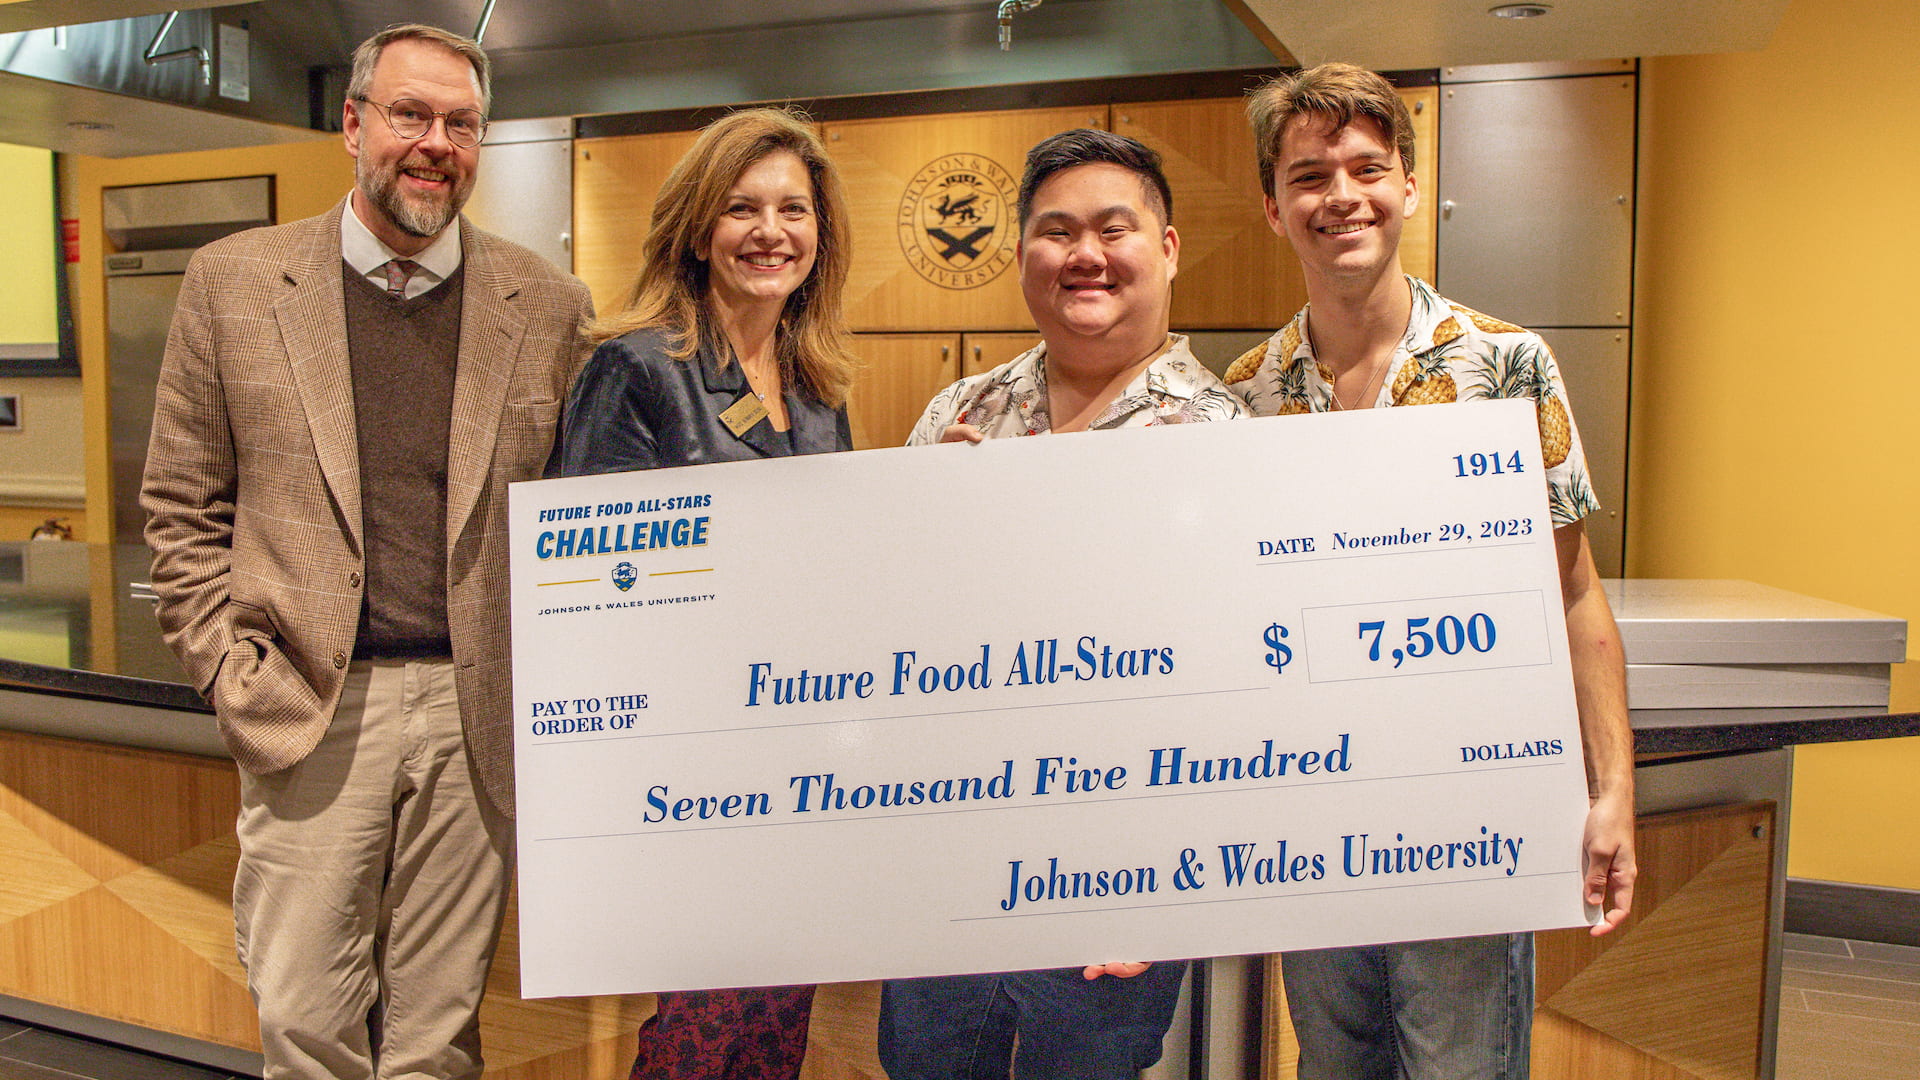 Spencer Mah and John Owen (right) with CFIT Dean Evans and JWU Providence Campus President Bernardo-Sousa (left) and the winning check.